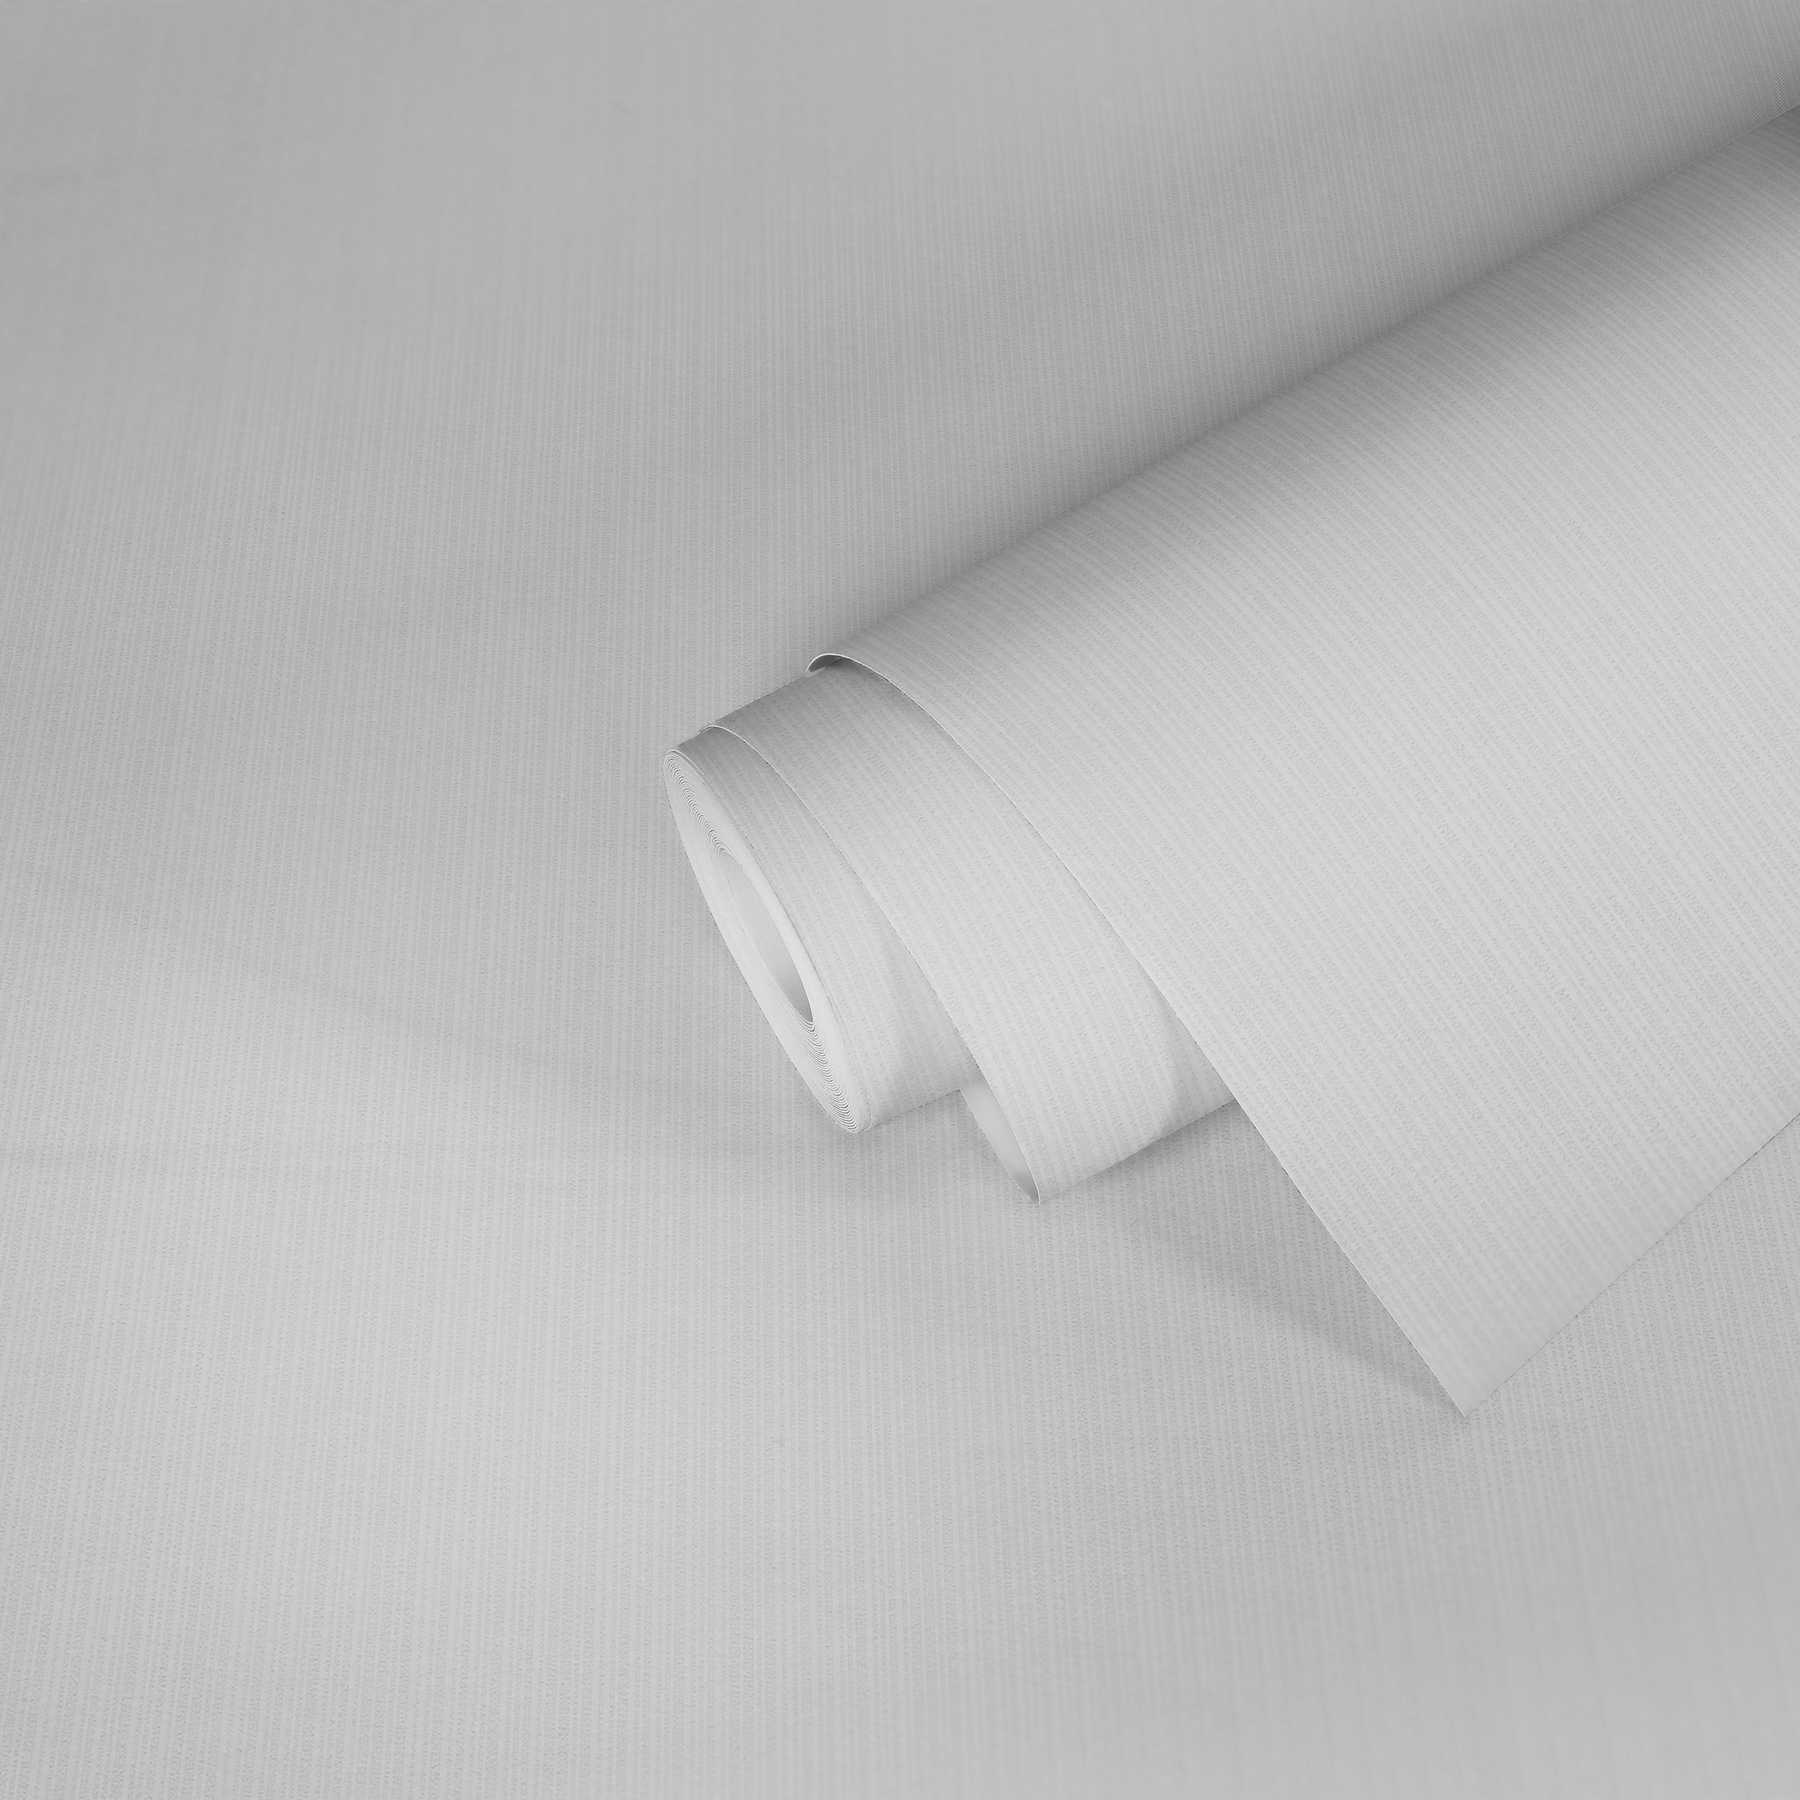             Non-woven wallpaper pigment plain white with textured pattern
        